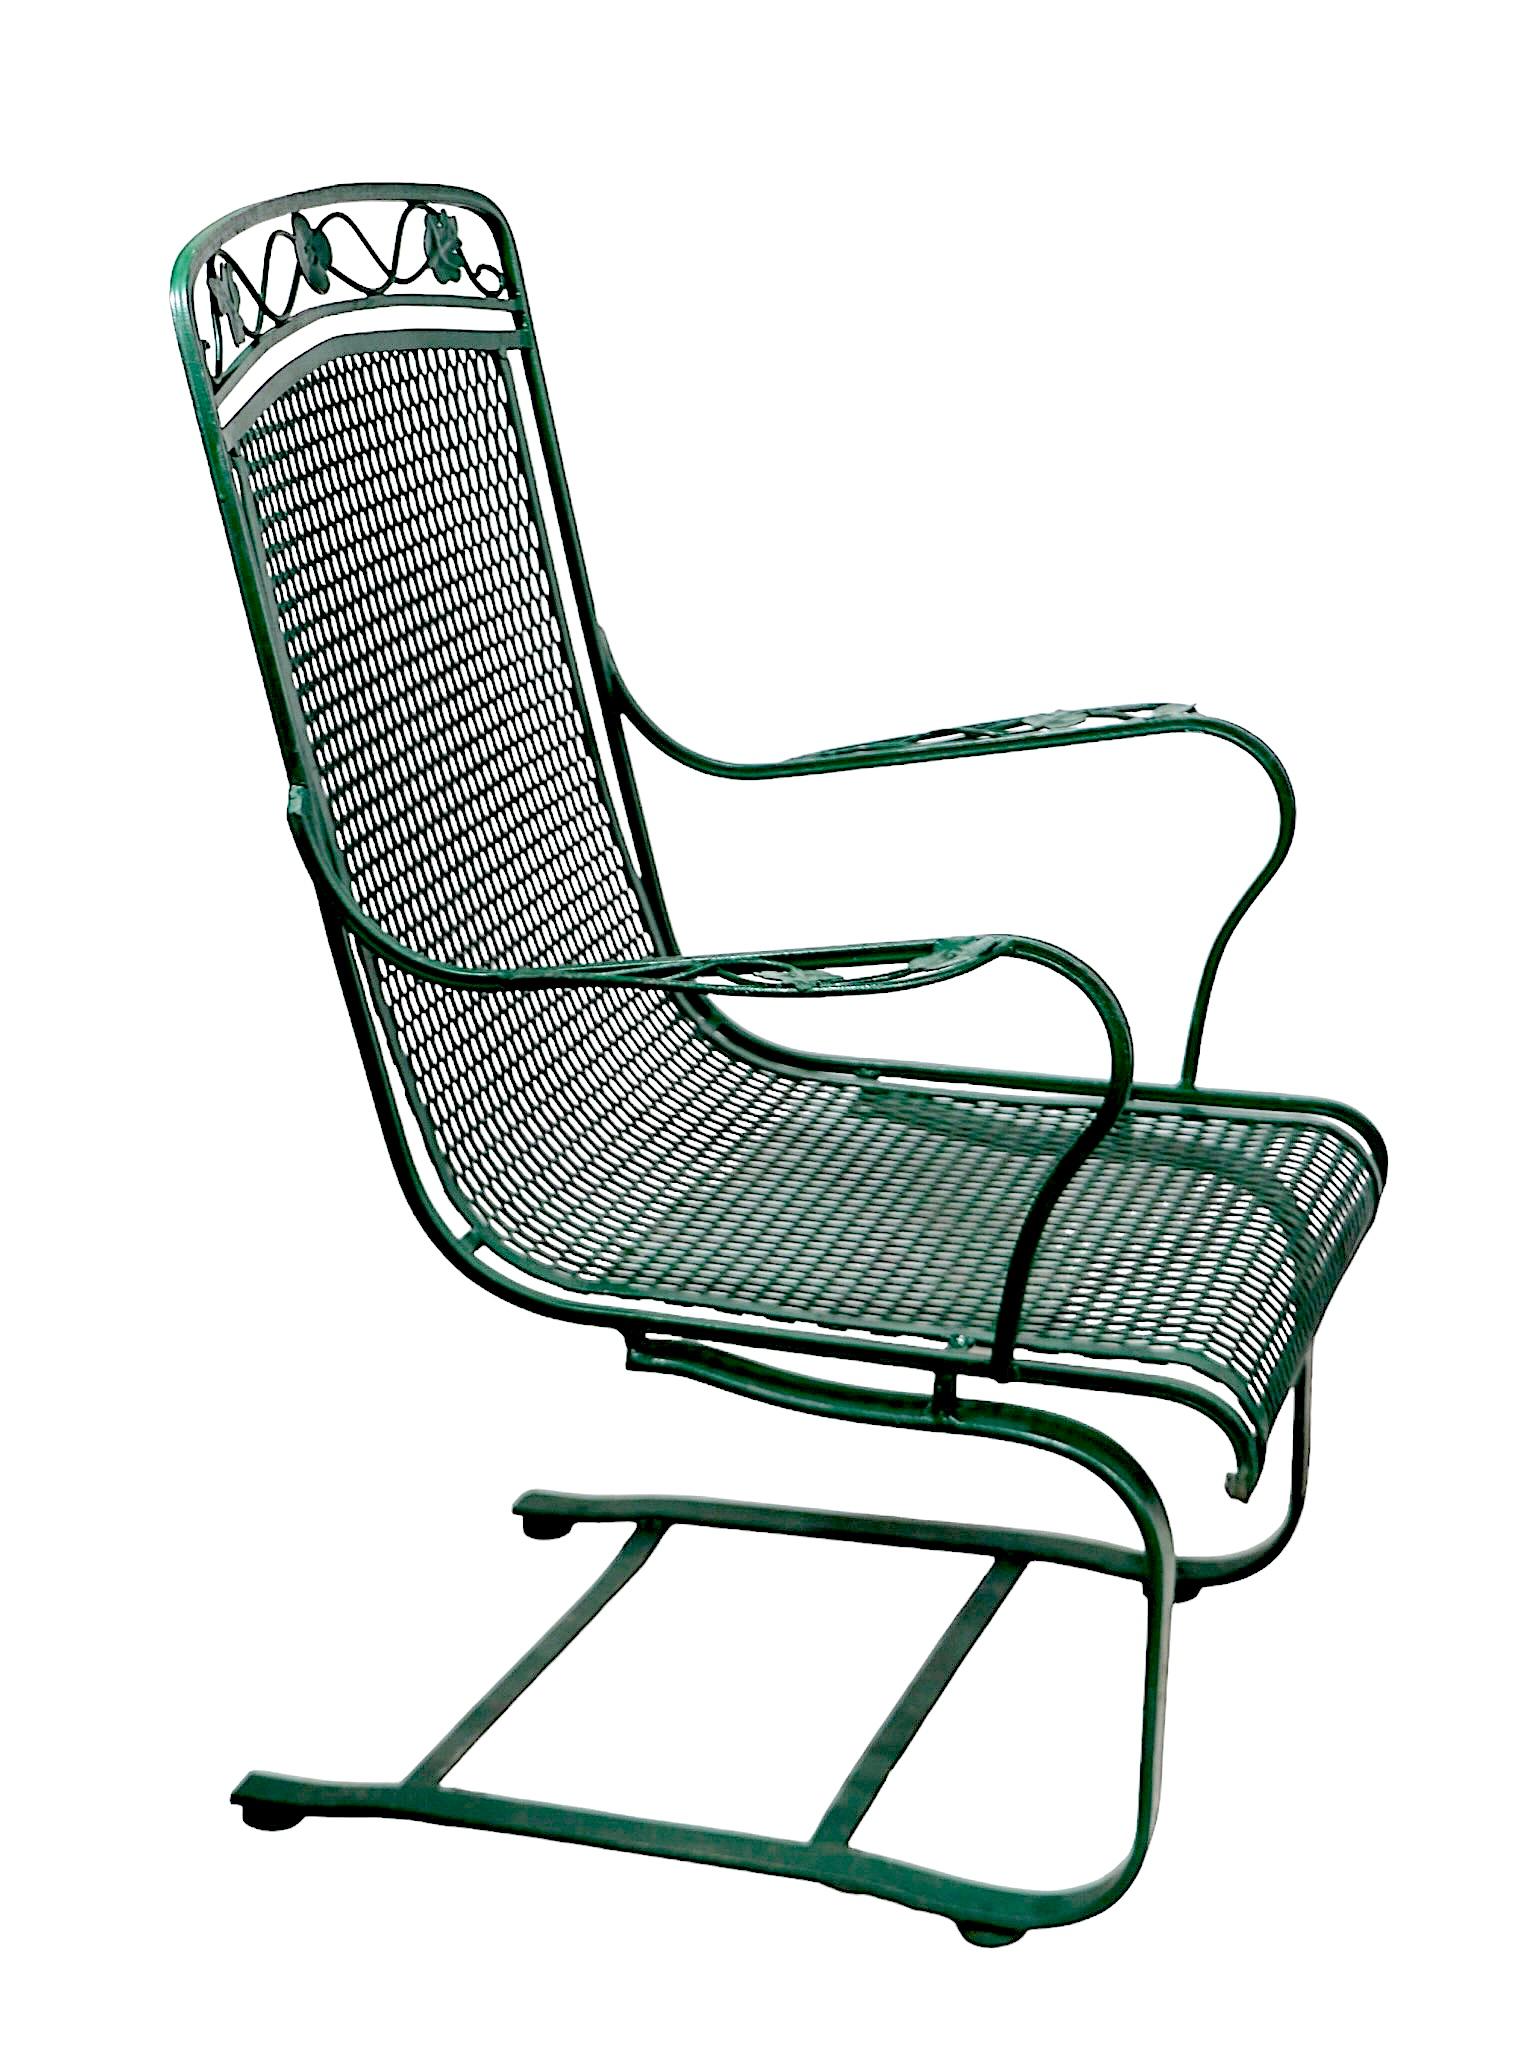 Pr. Cantilevered  Meadowcraft Dogwood Wrought Iron Lounge Chairs  For Sale 4